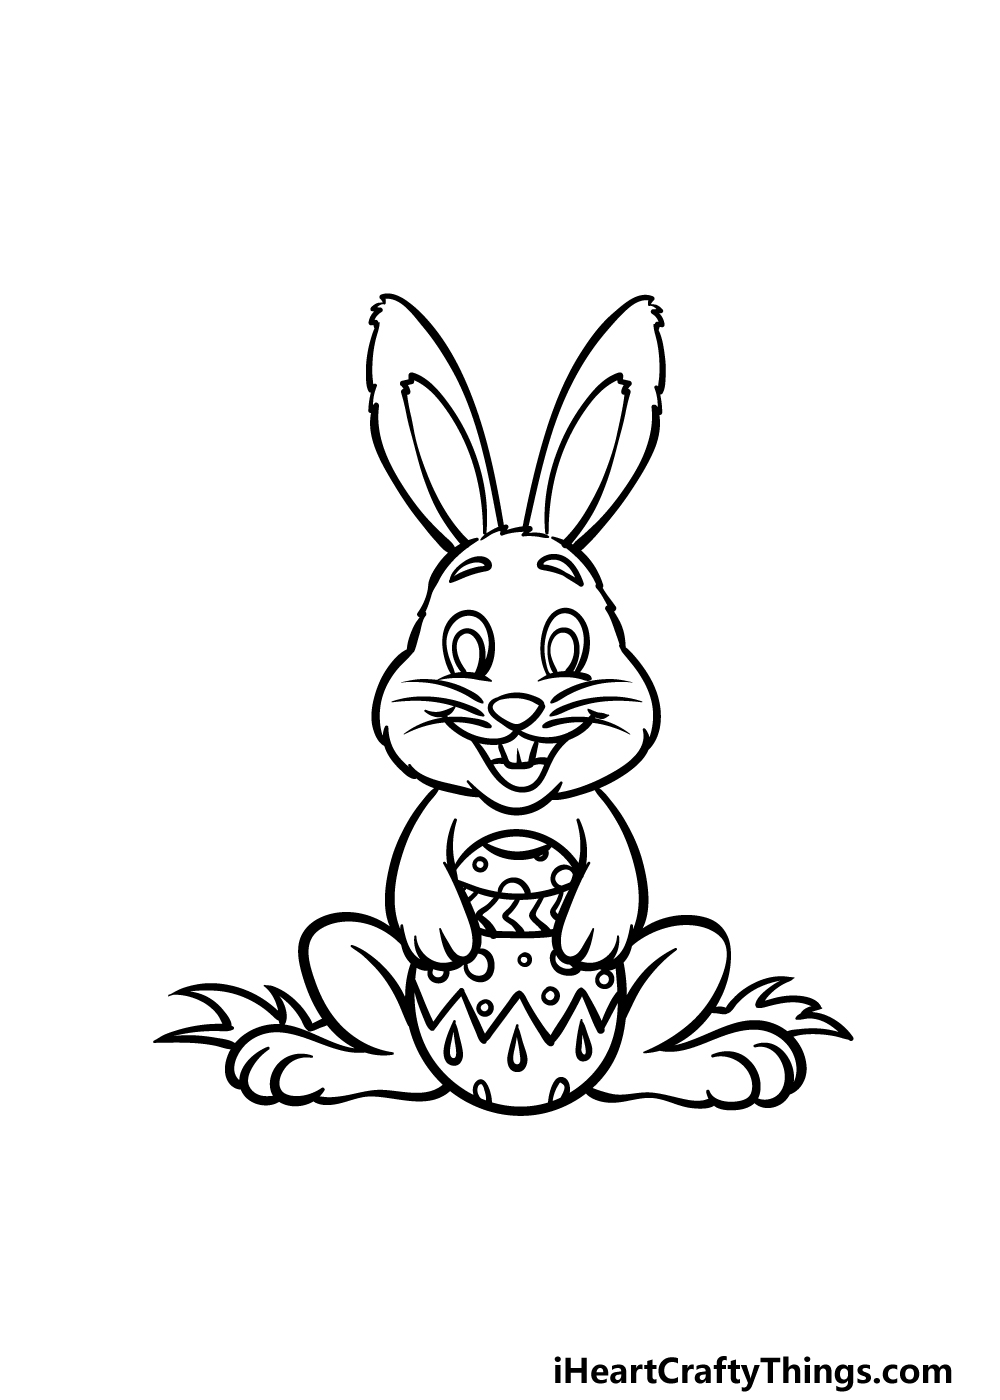 Drawing of an easter bunny